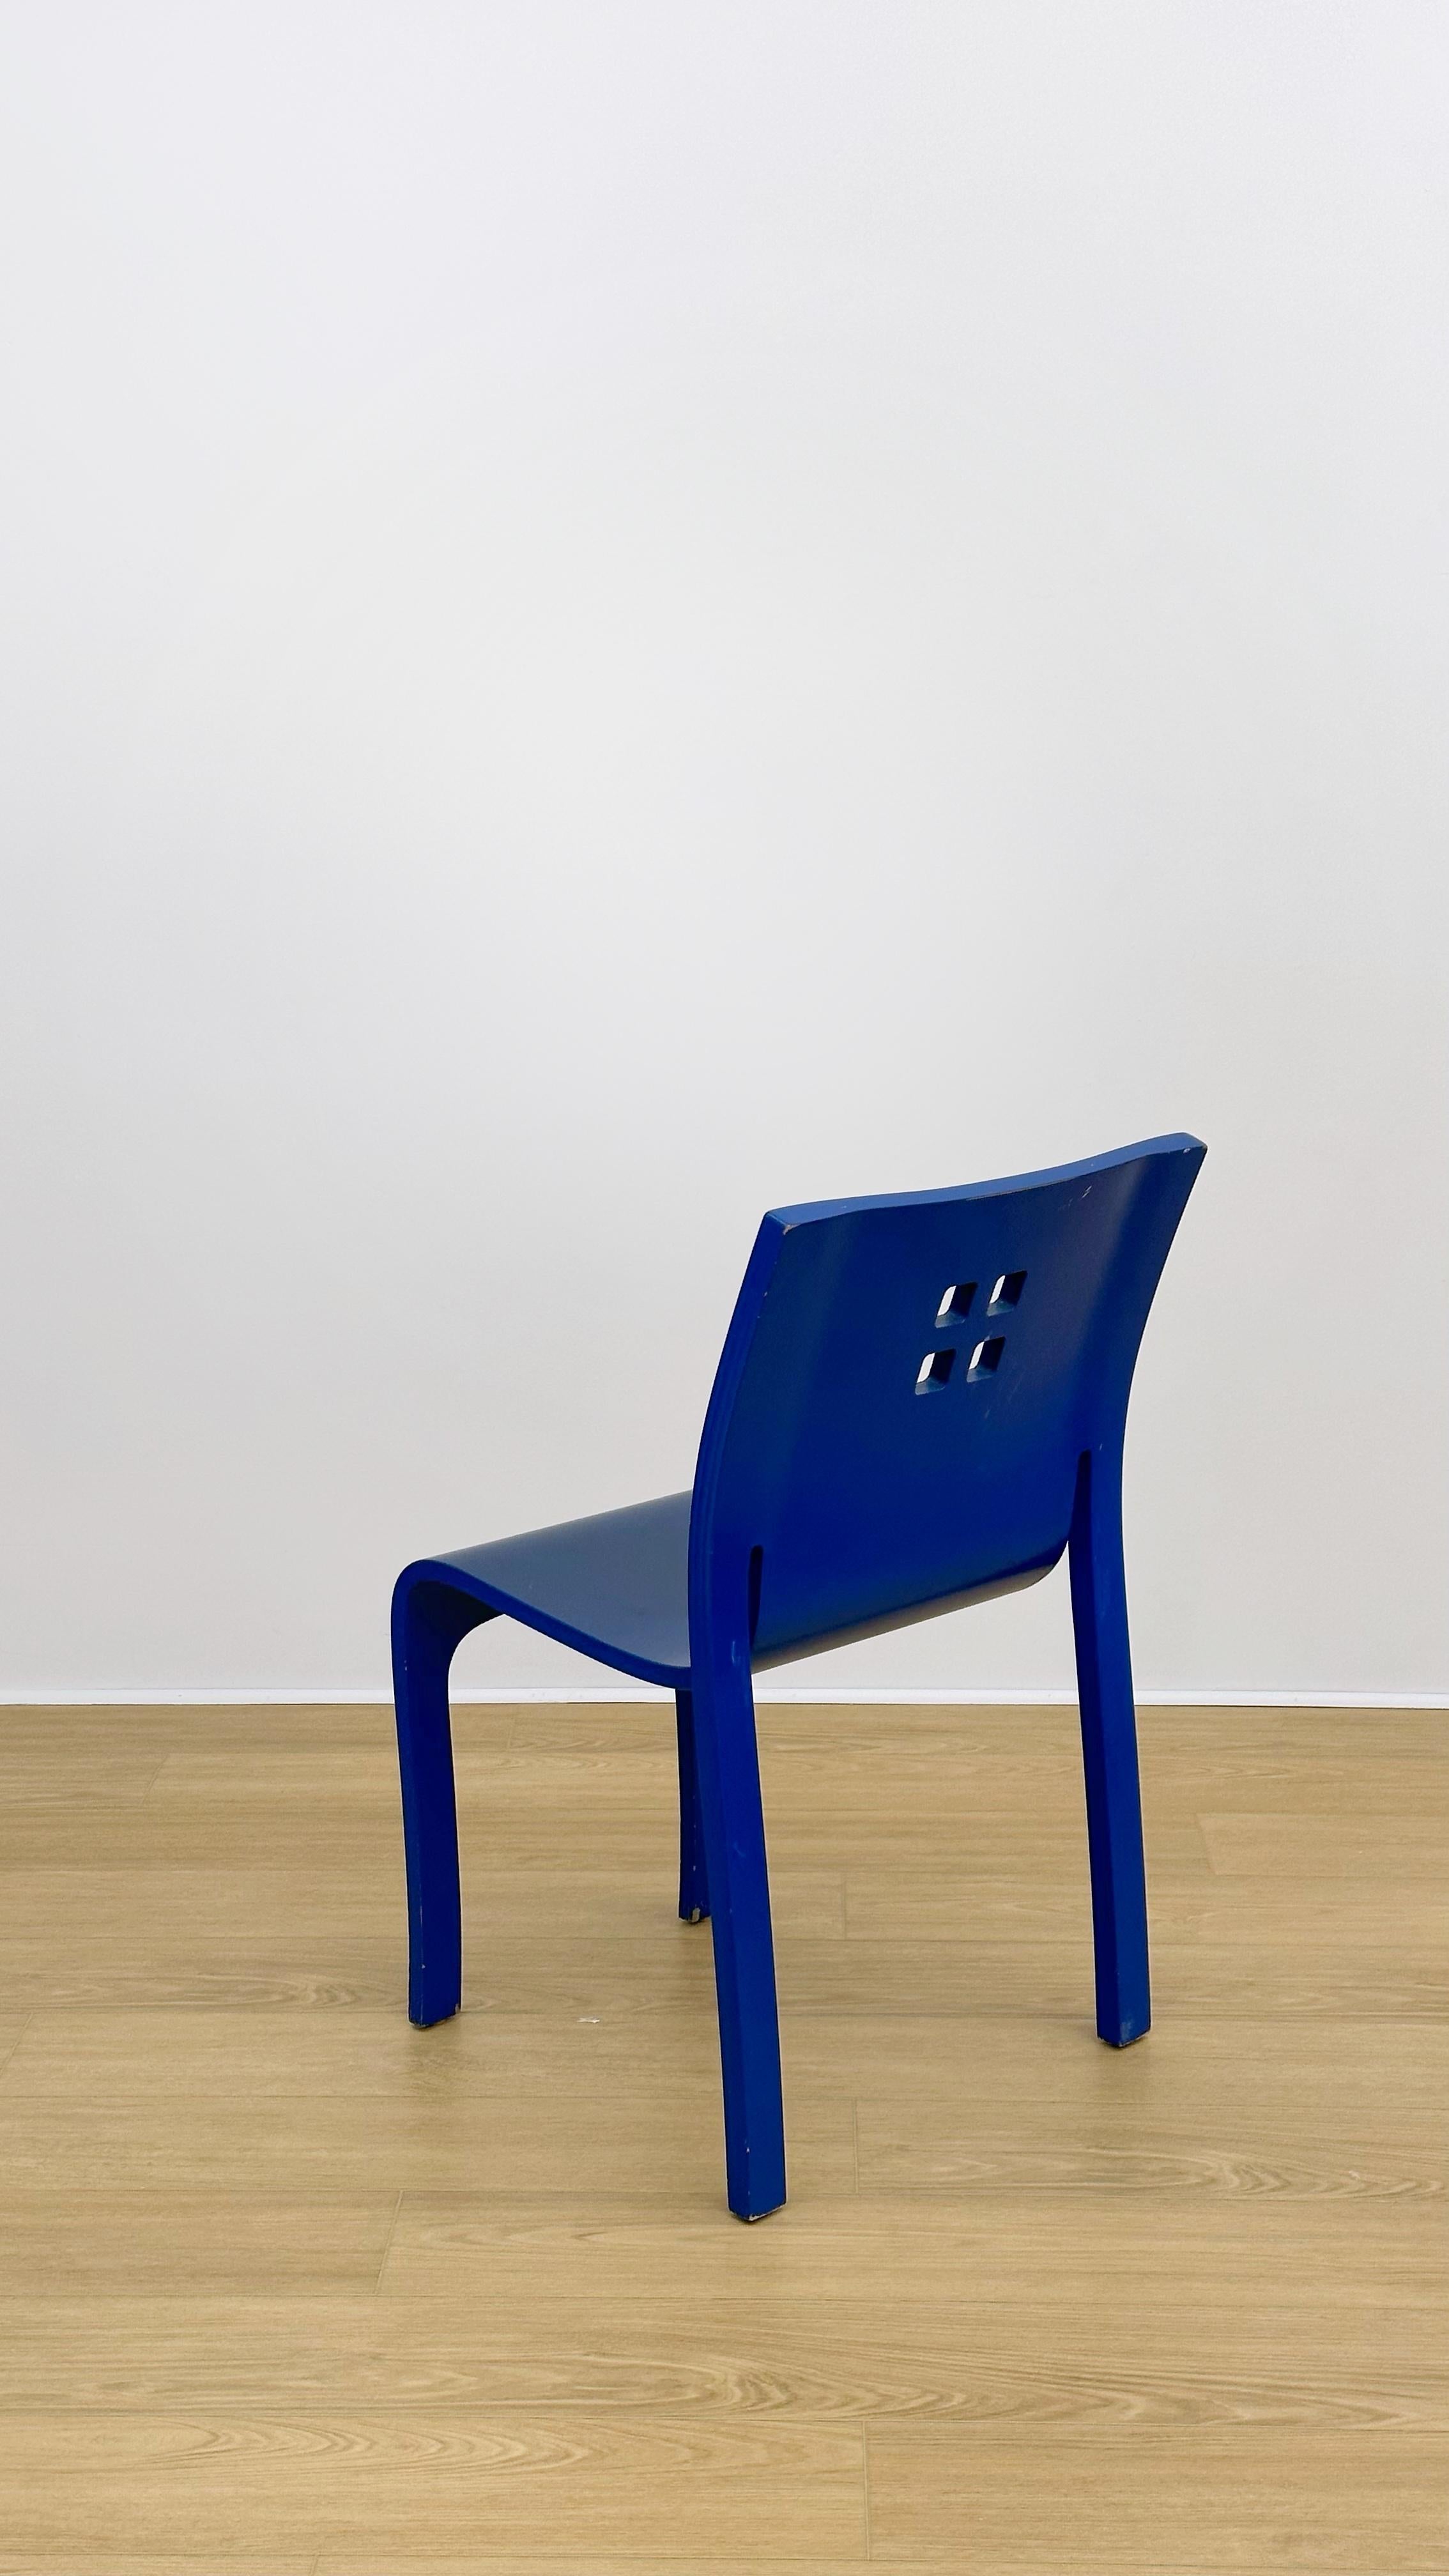 American Bodyform variant chair by Peter Danko For Sale